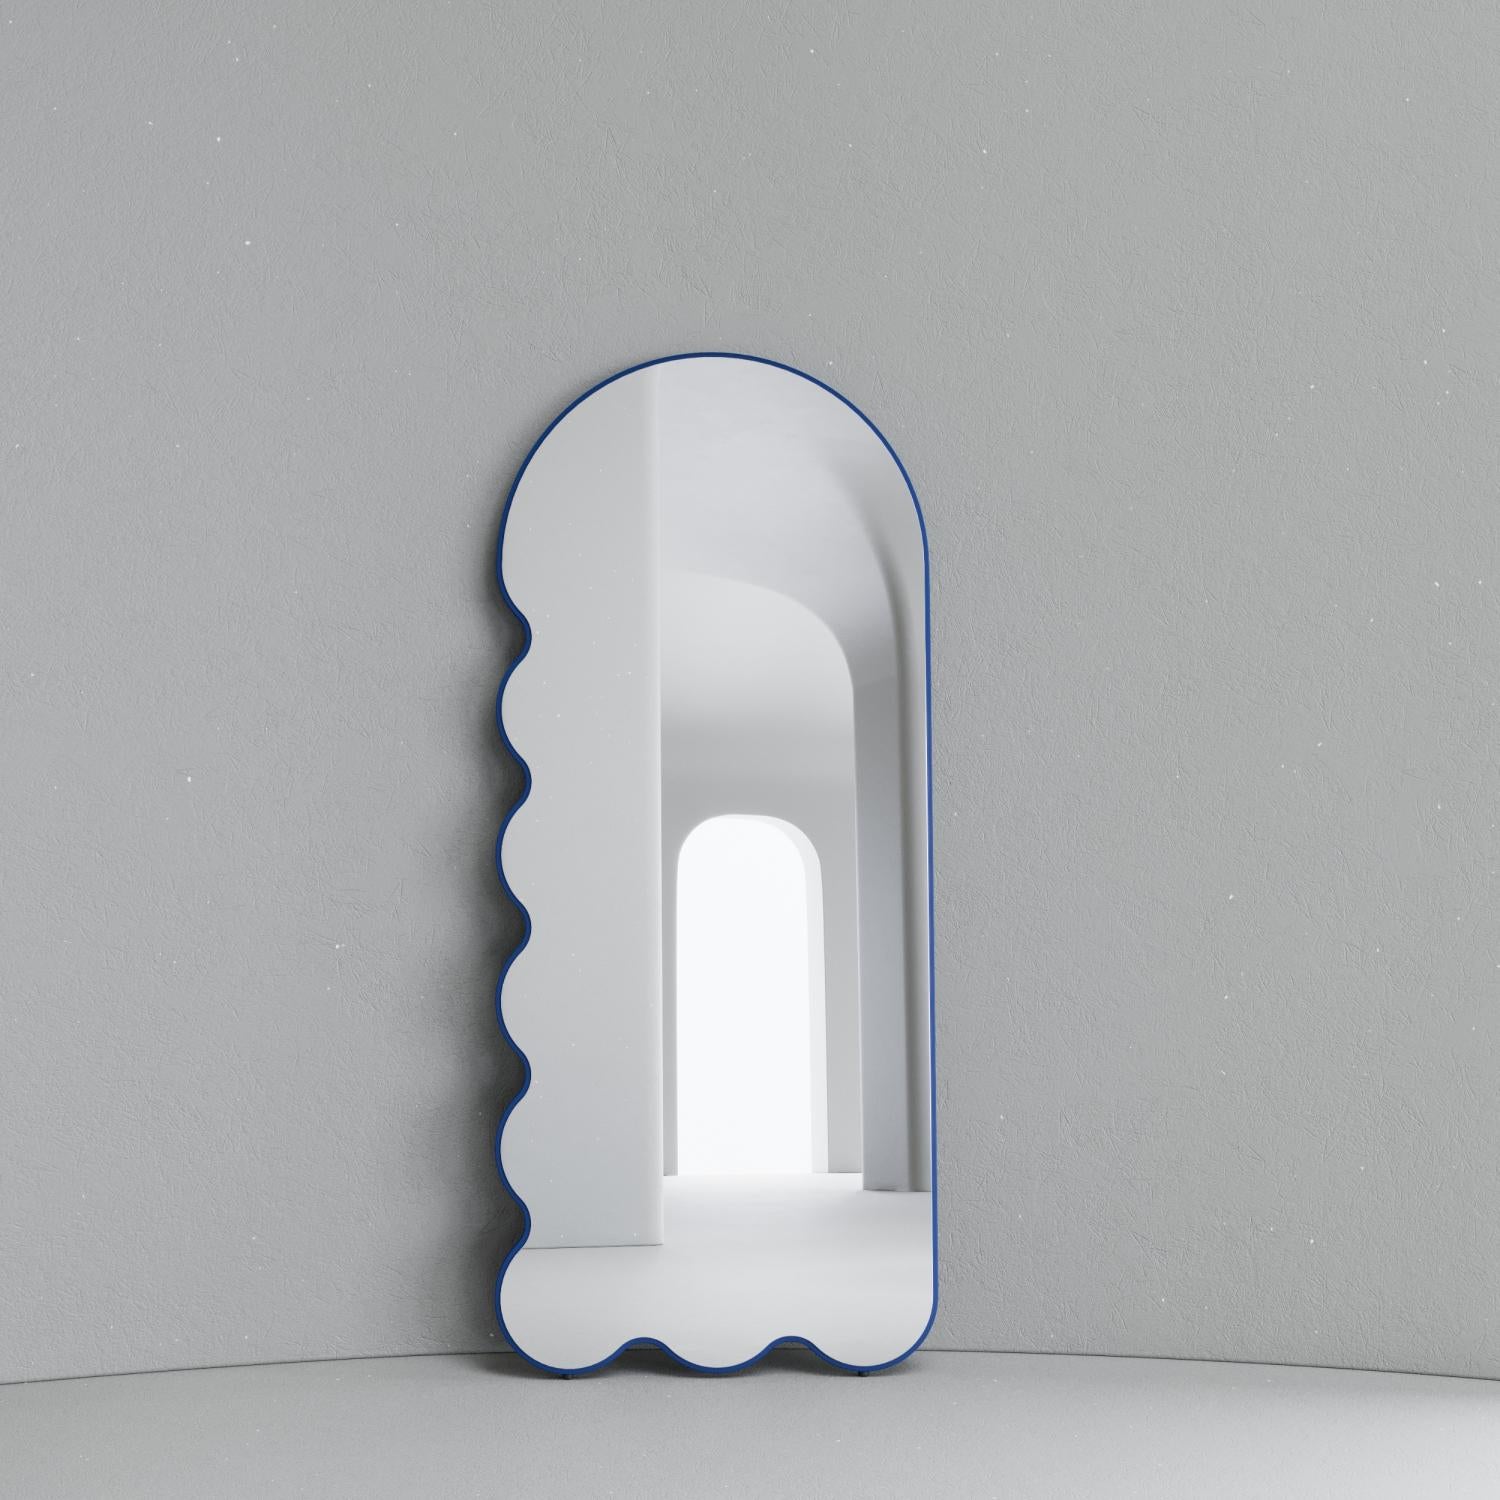 Contemporary Mirror 'Archvyli L8' by Oitoproducts.

Dimensions:
W 78 cm x H 180 cm x D 4 cm
W 37 in x H 71 in x D 1.3 in

Materials: Painted ecological water paint MDF, silver glass mirror, special rubber feet.

About
A full-length art mirror that